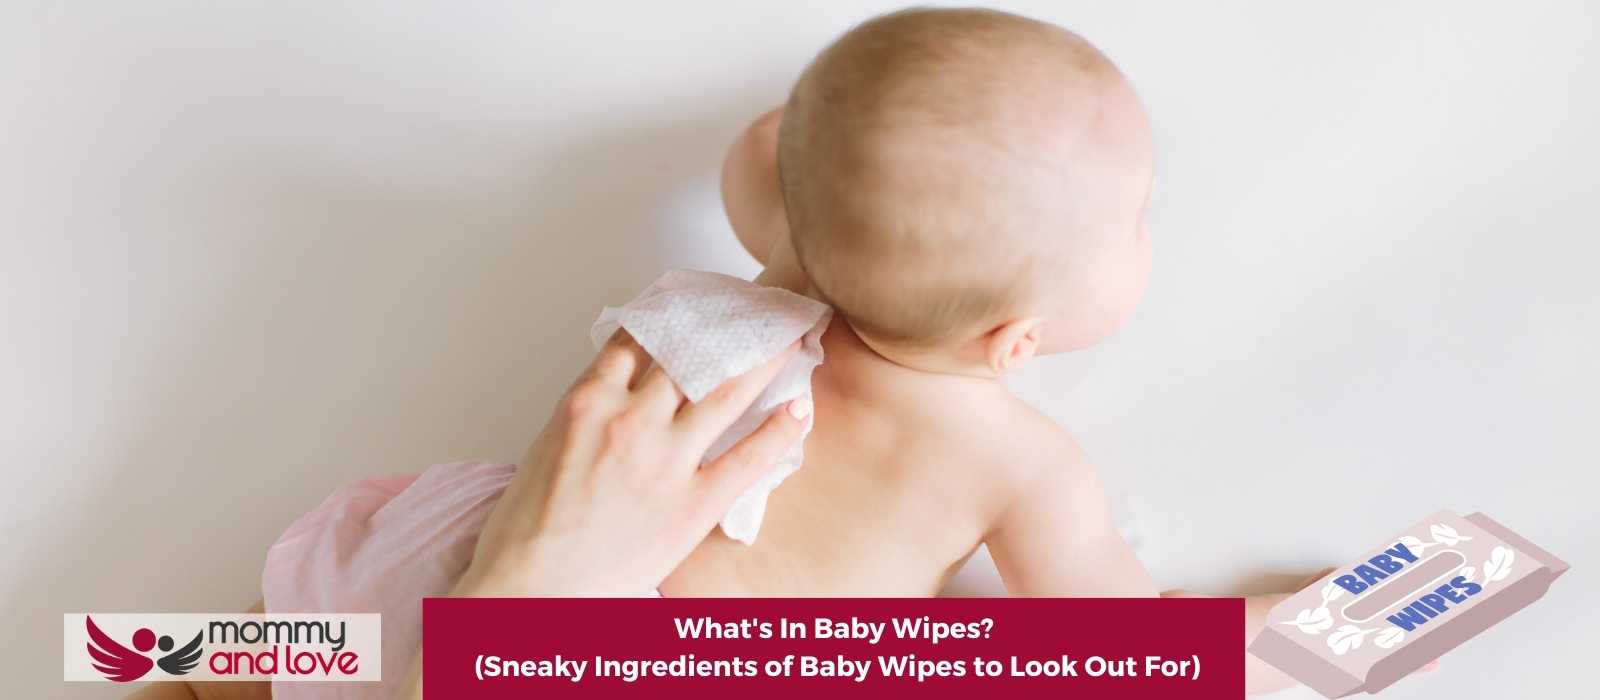 What’s In Baby Wipes? (Sneaky Ingredients of Baby Wipes to Look Out For)